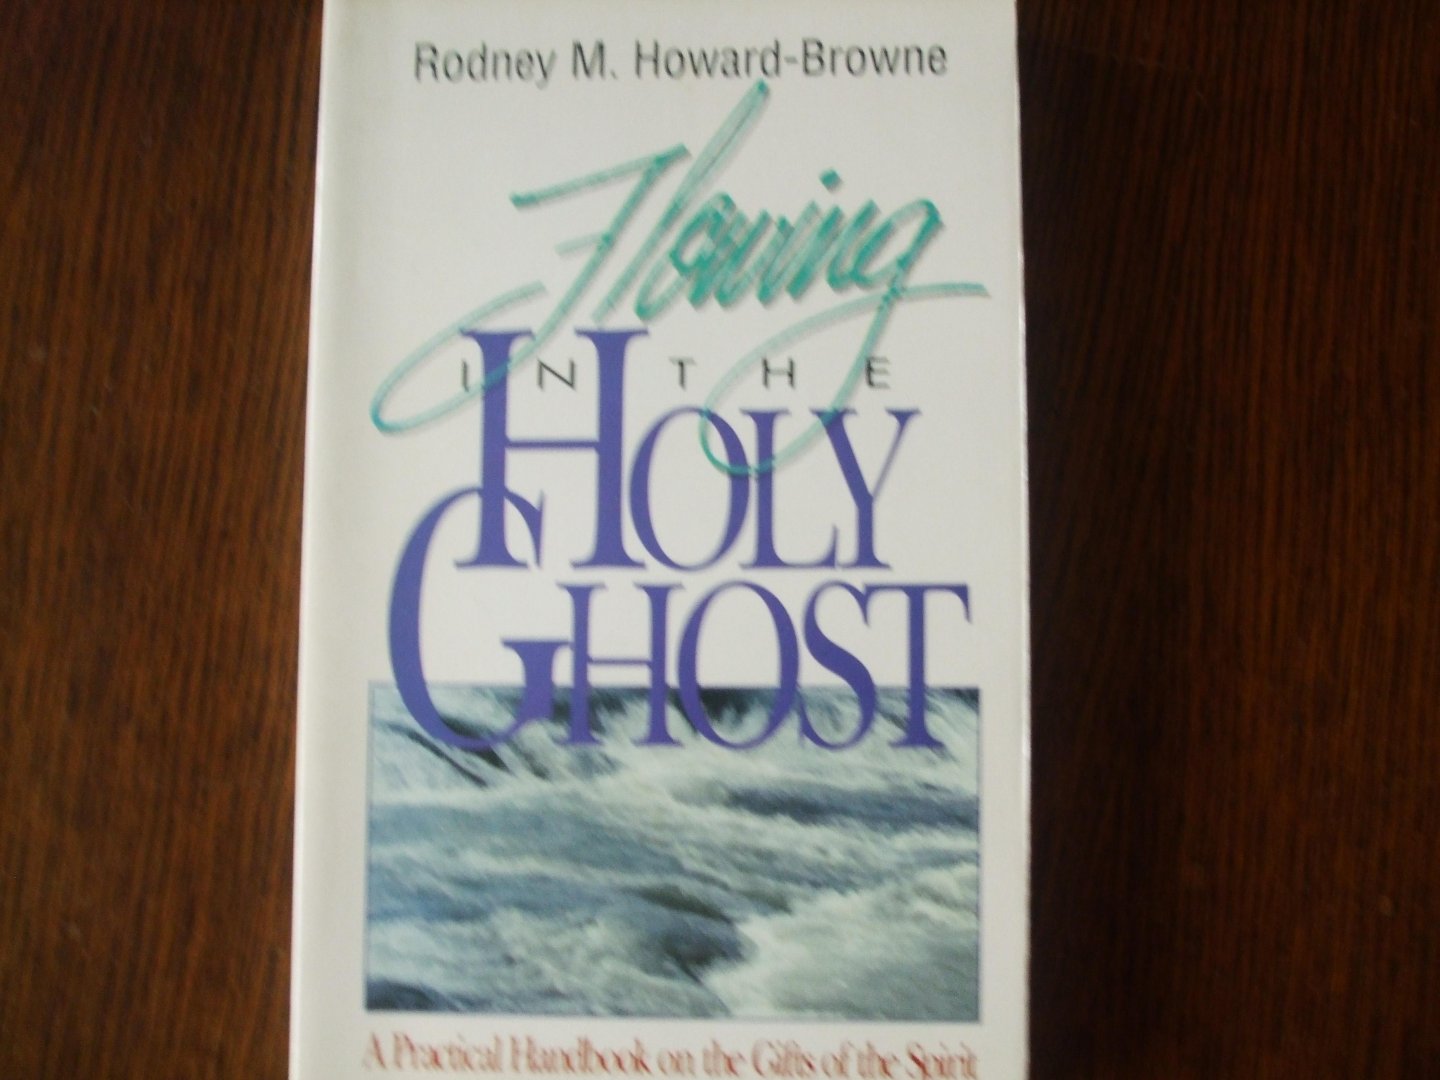 Rodney M Howard-Browne - Flowing in the Holy Ghost